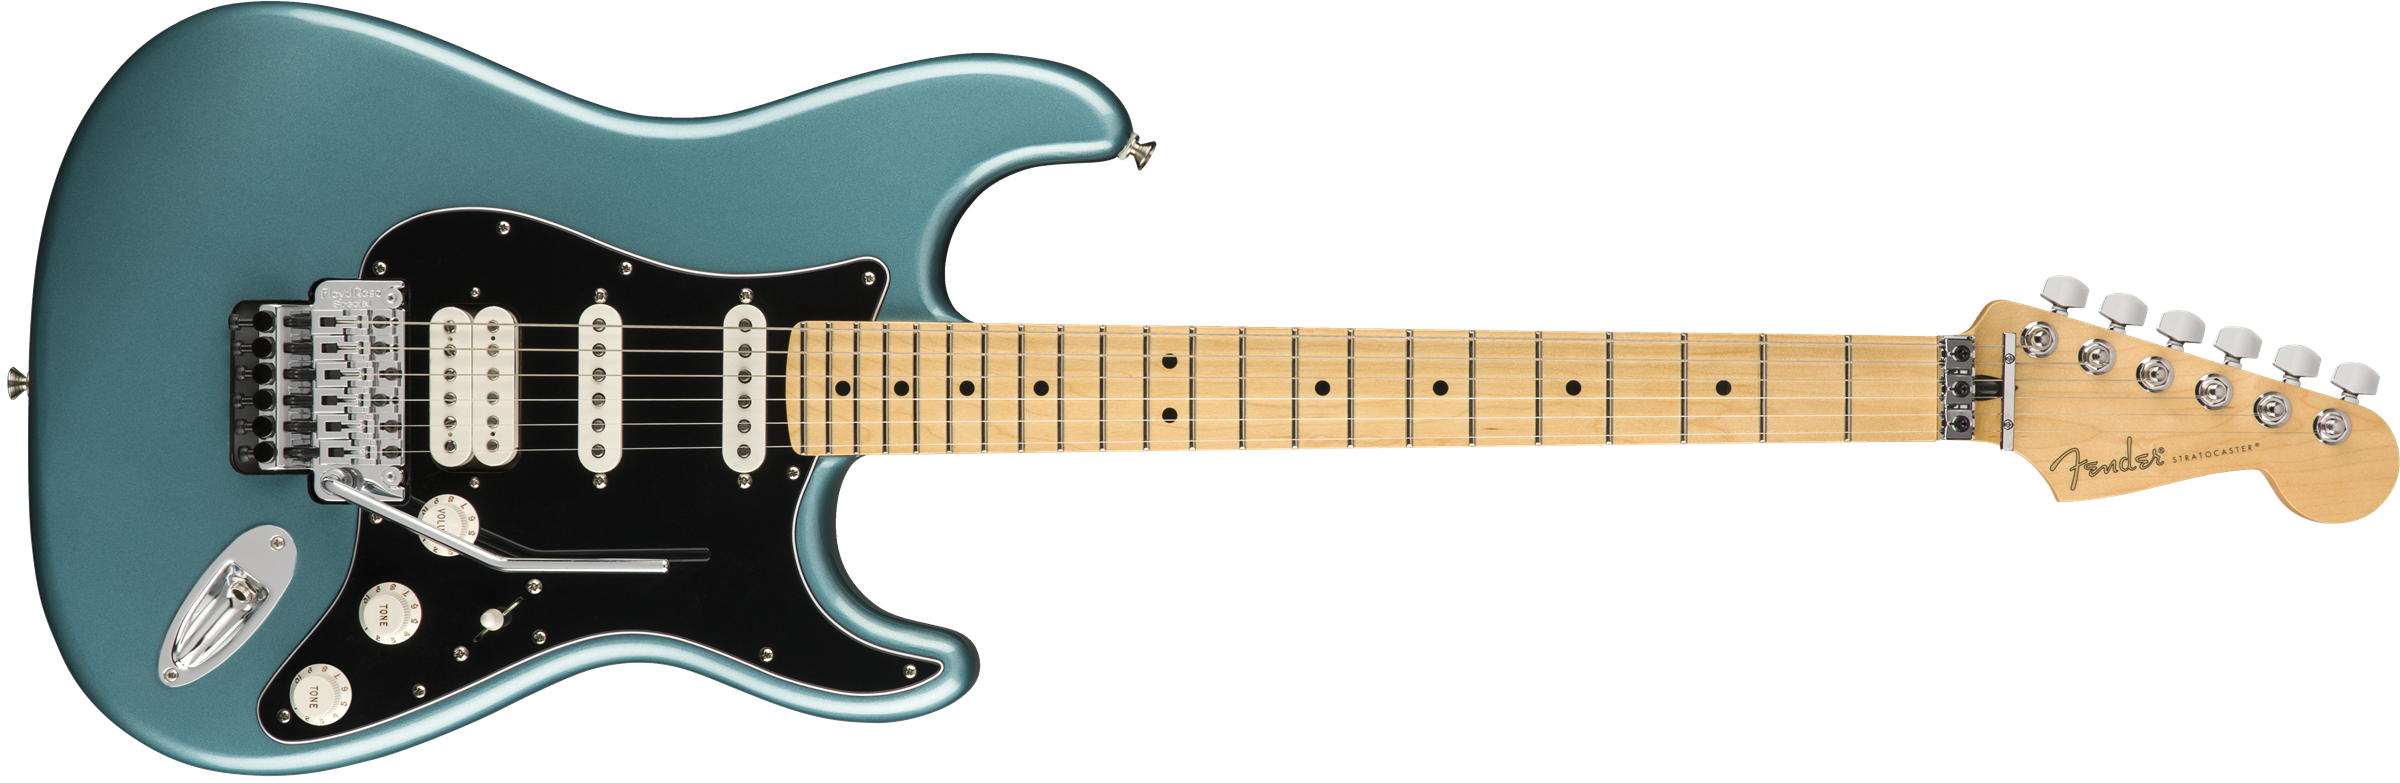 Fender Stratocaster Player Tidepool Selling